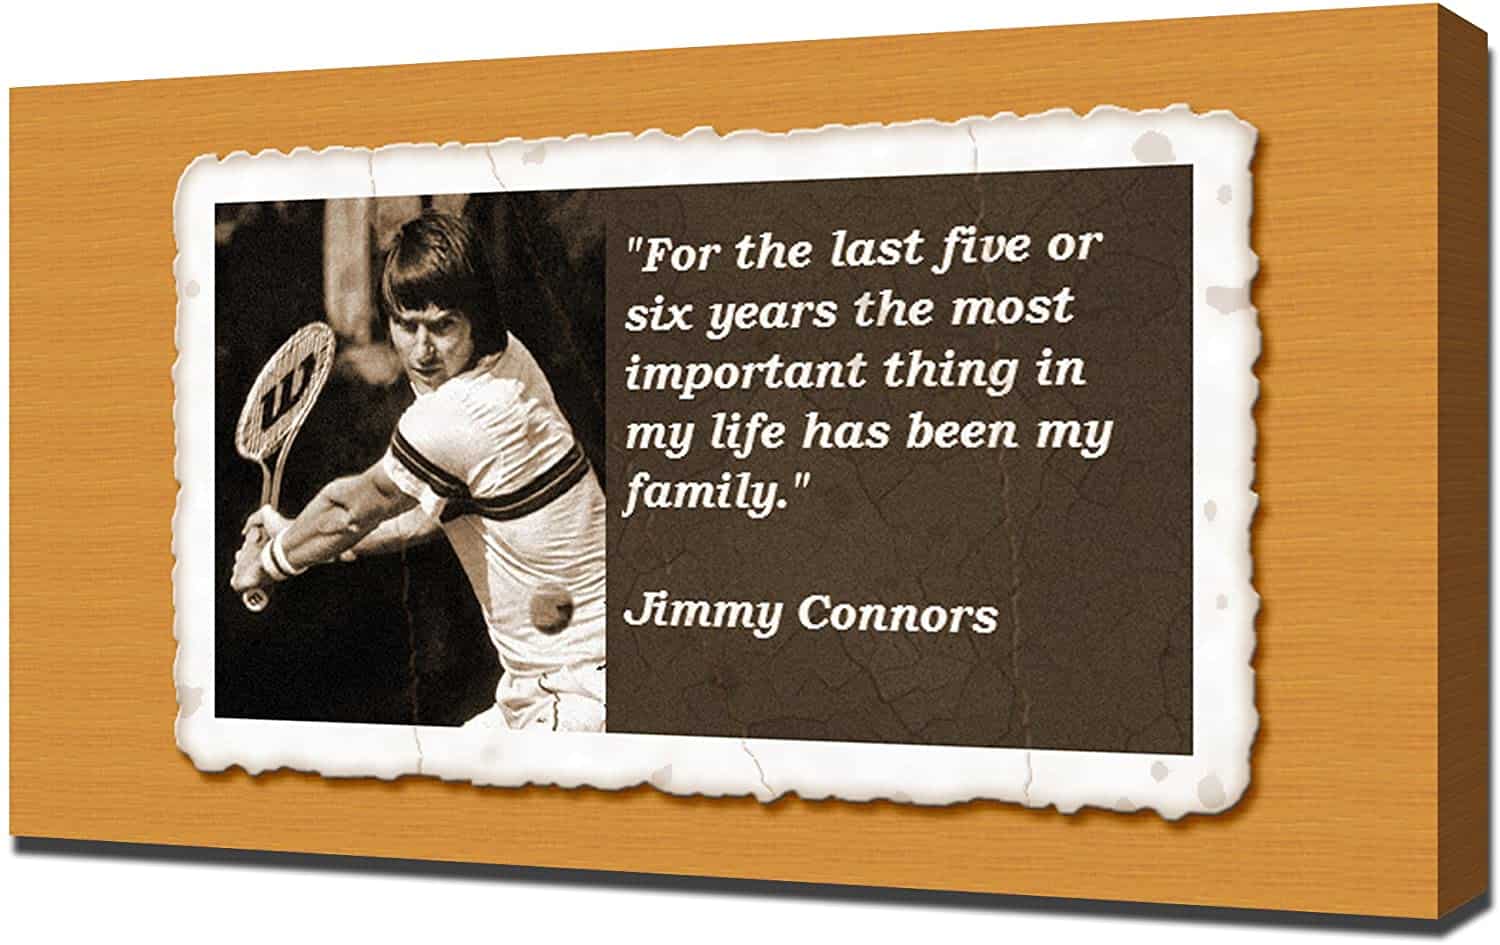 Jimmy Connors quote on family love